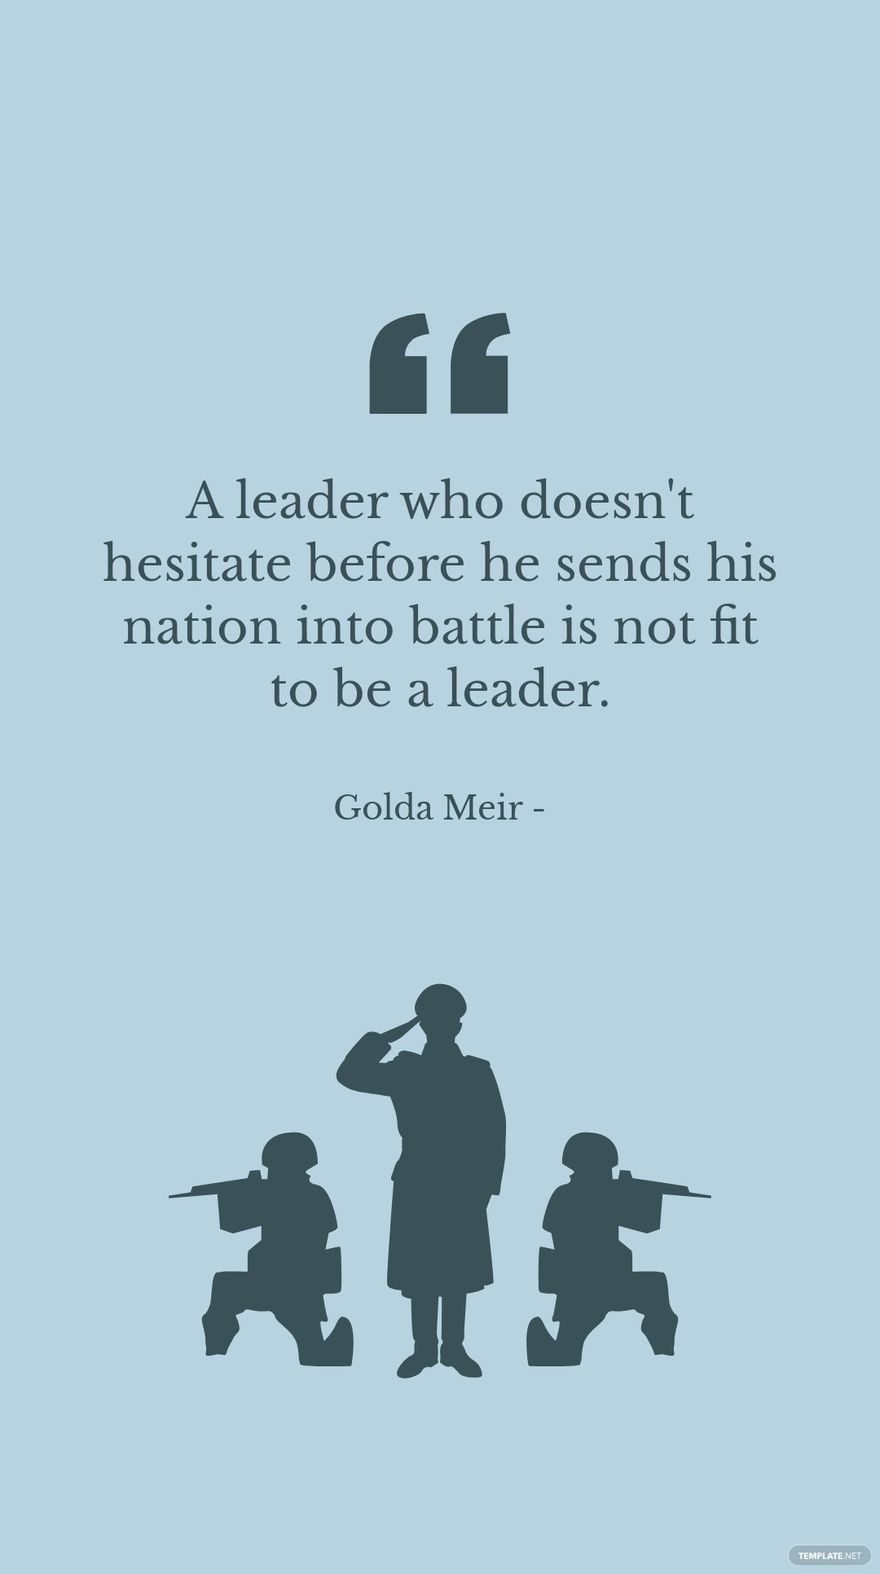 Golda Meir - A leader who doesn't hesitate before he sends his nation into battle is not fit to be a leader.